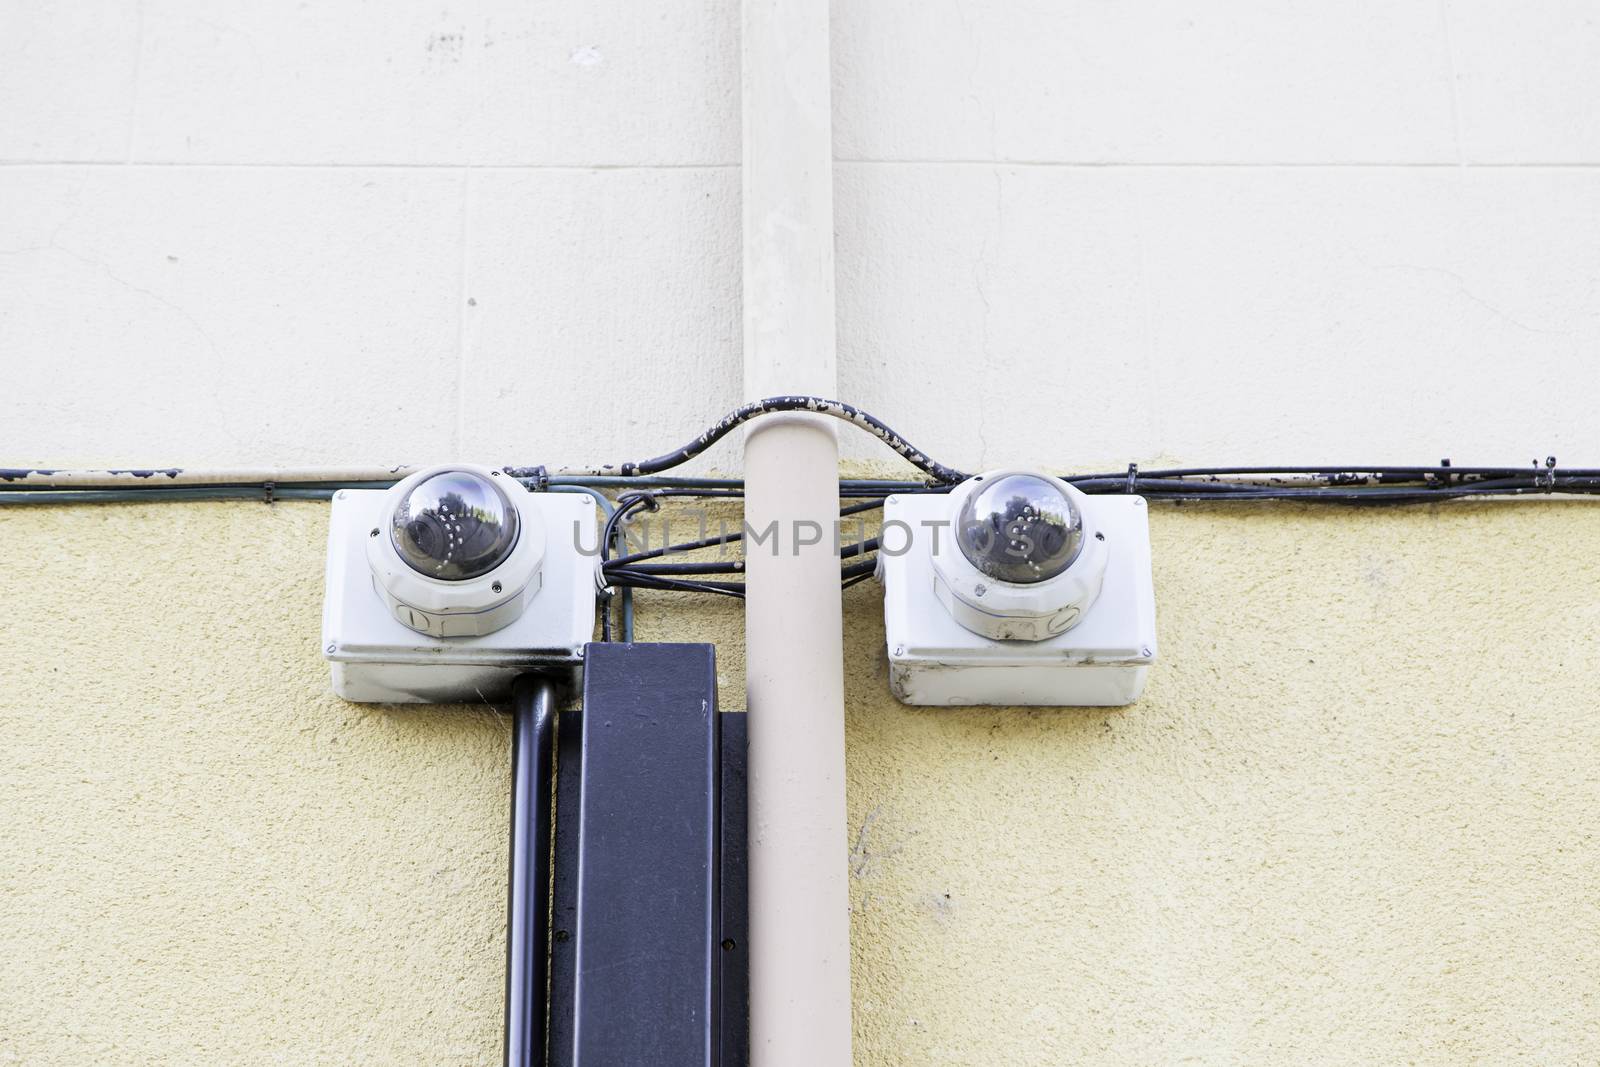 Security cameras in the street by esebene